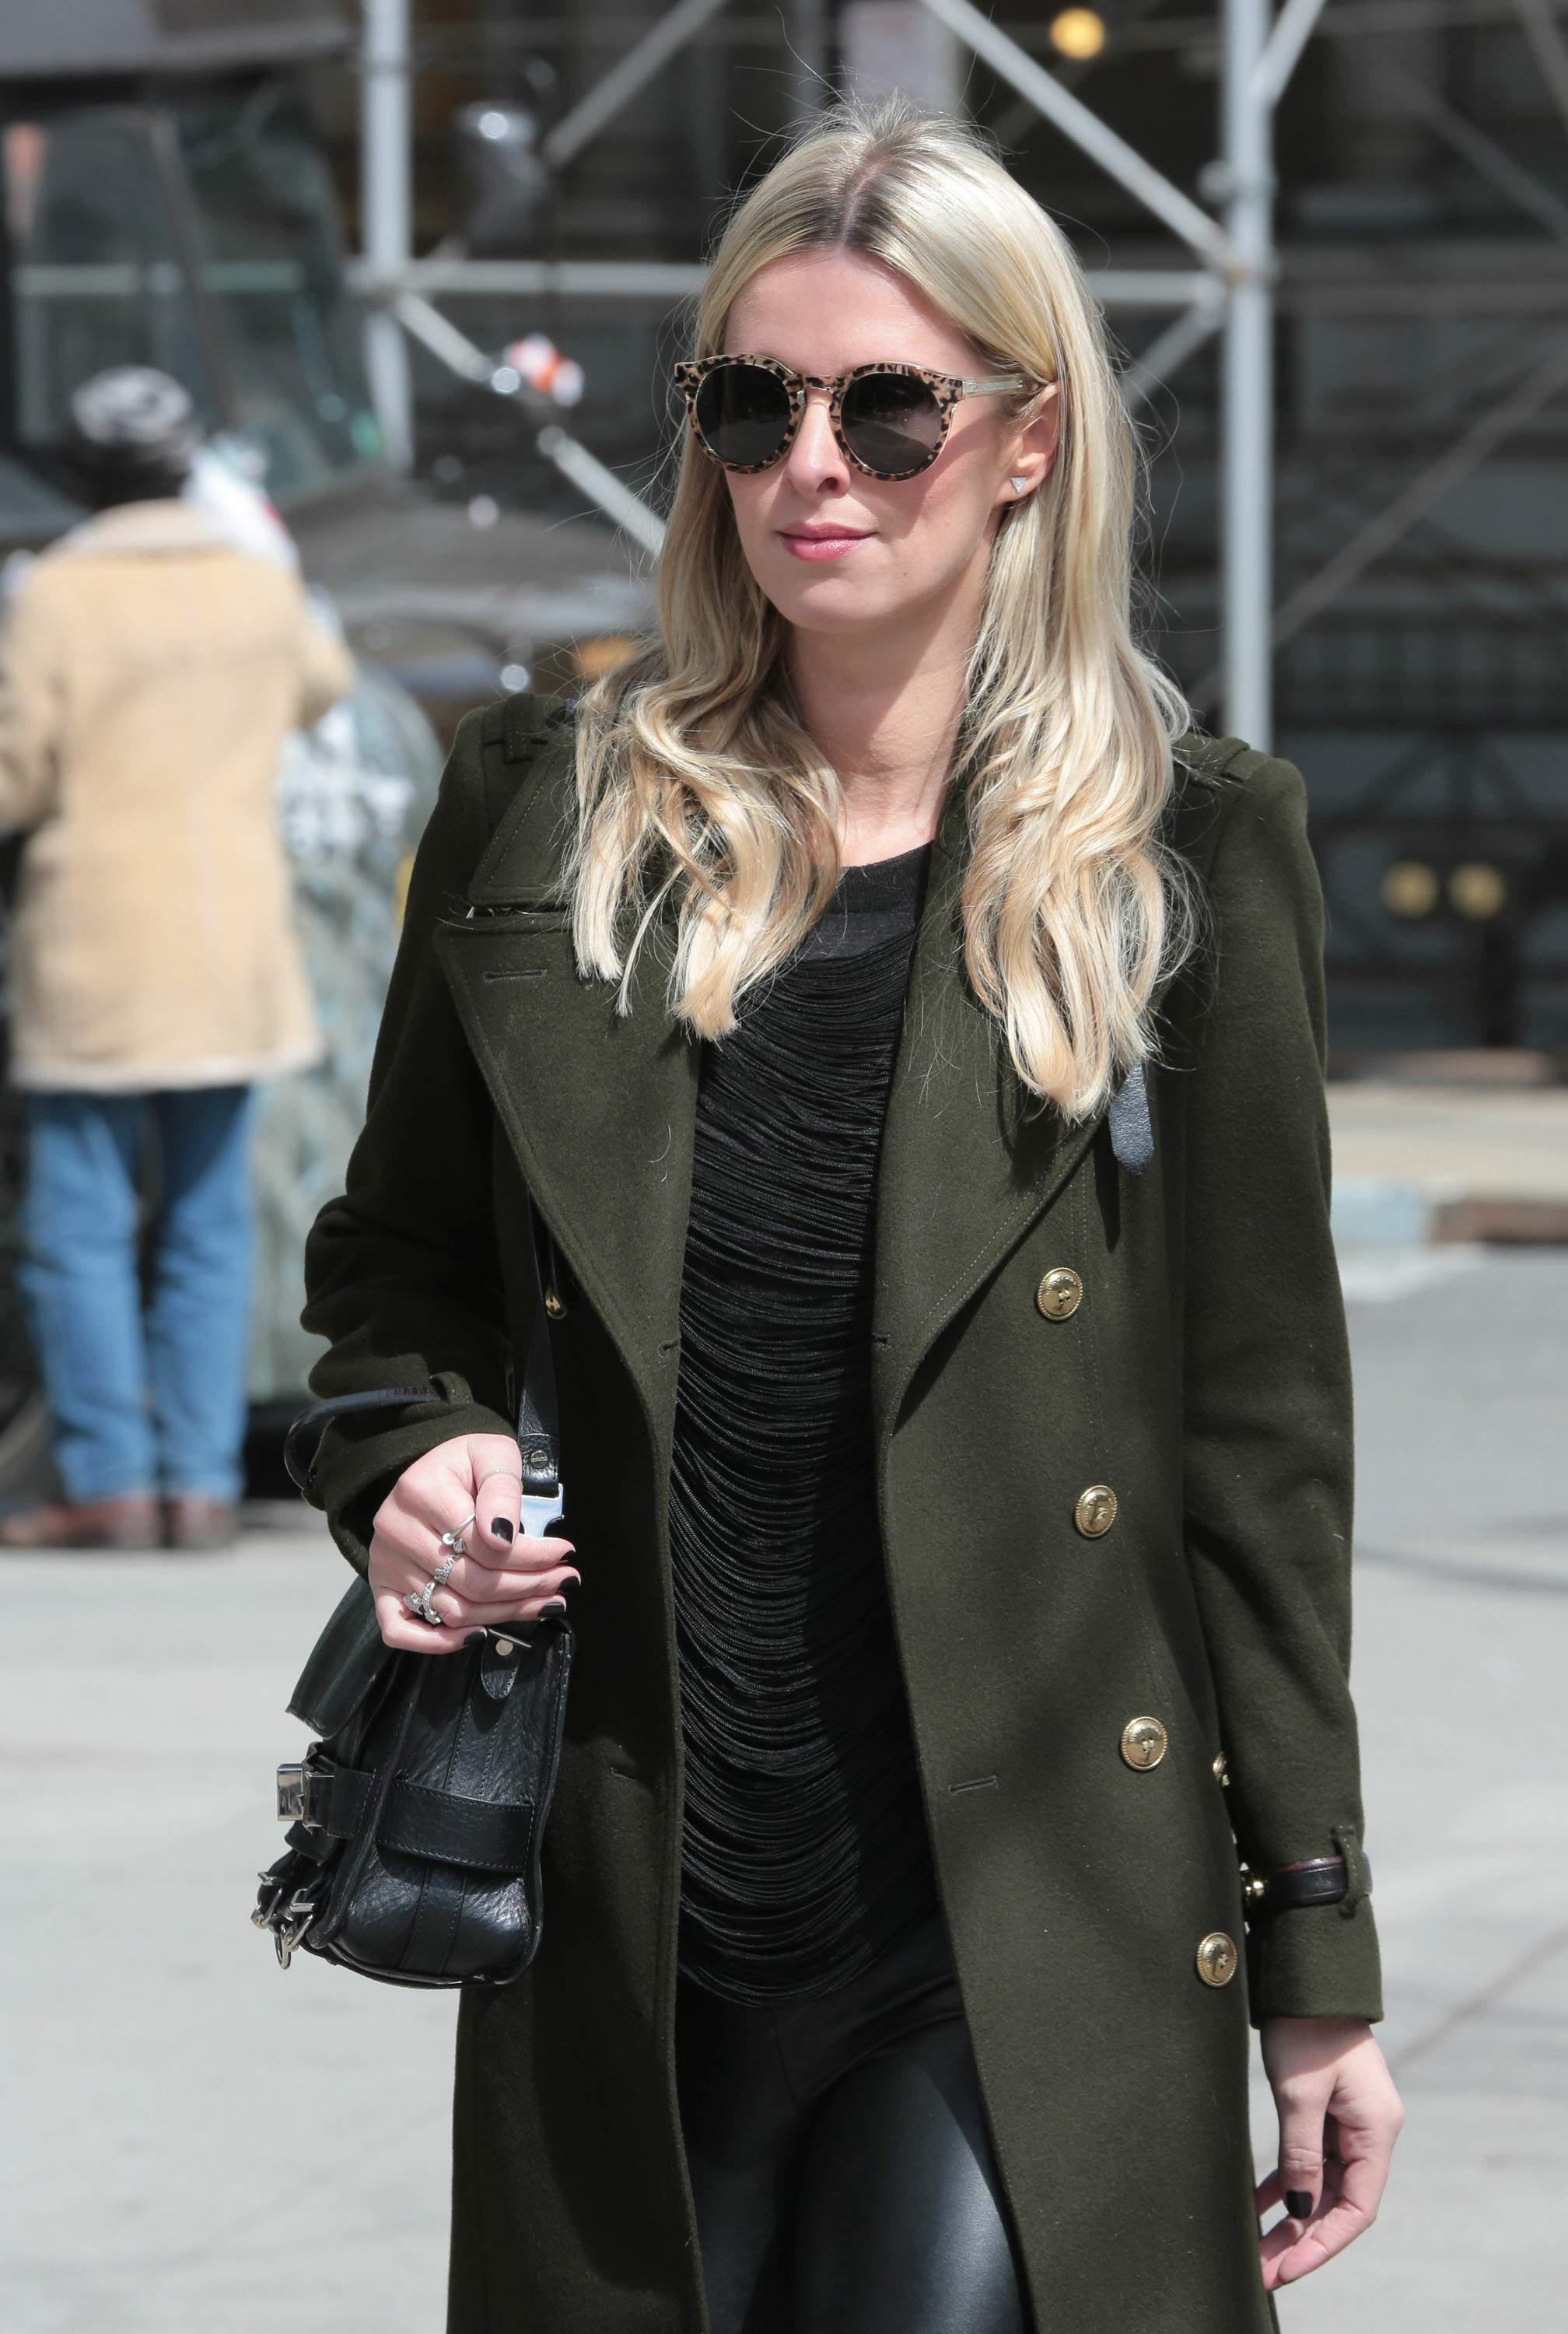 Nicky Hilton is seen in downtown Manhattan